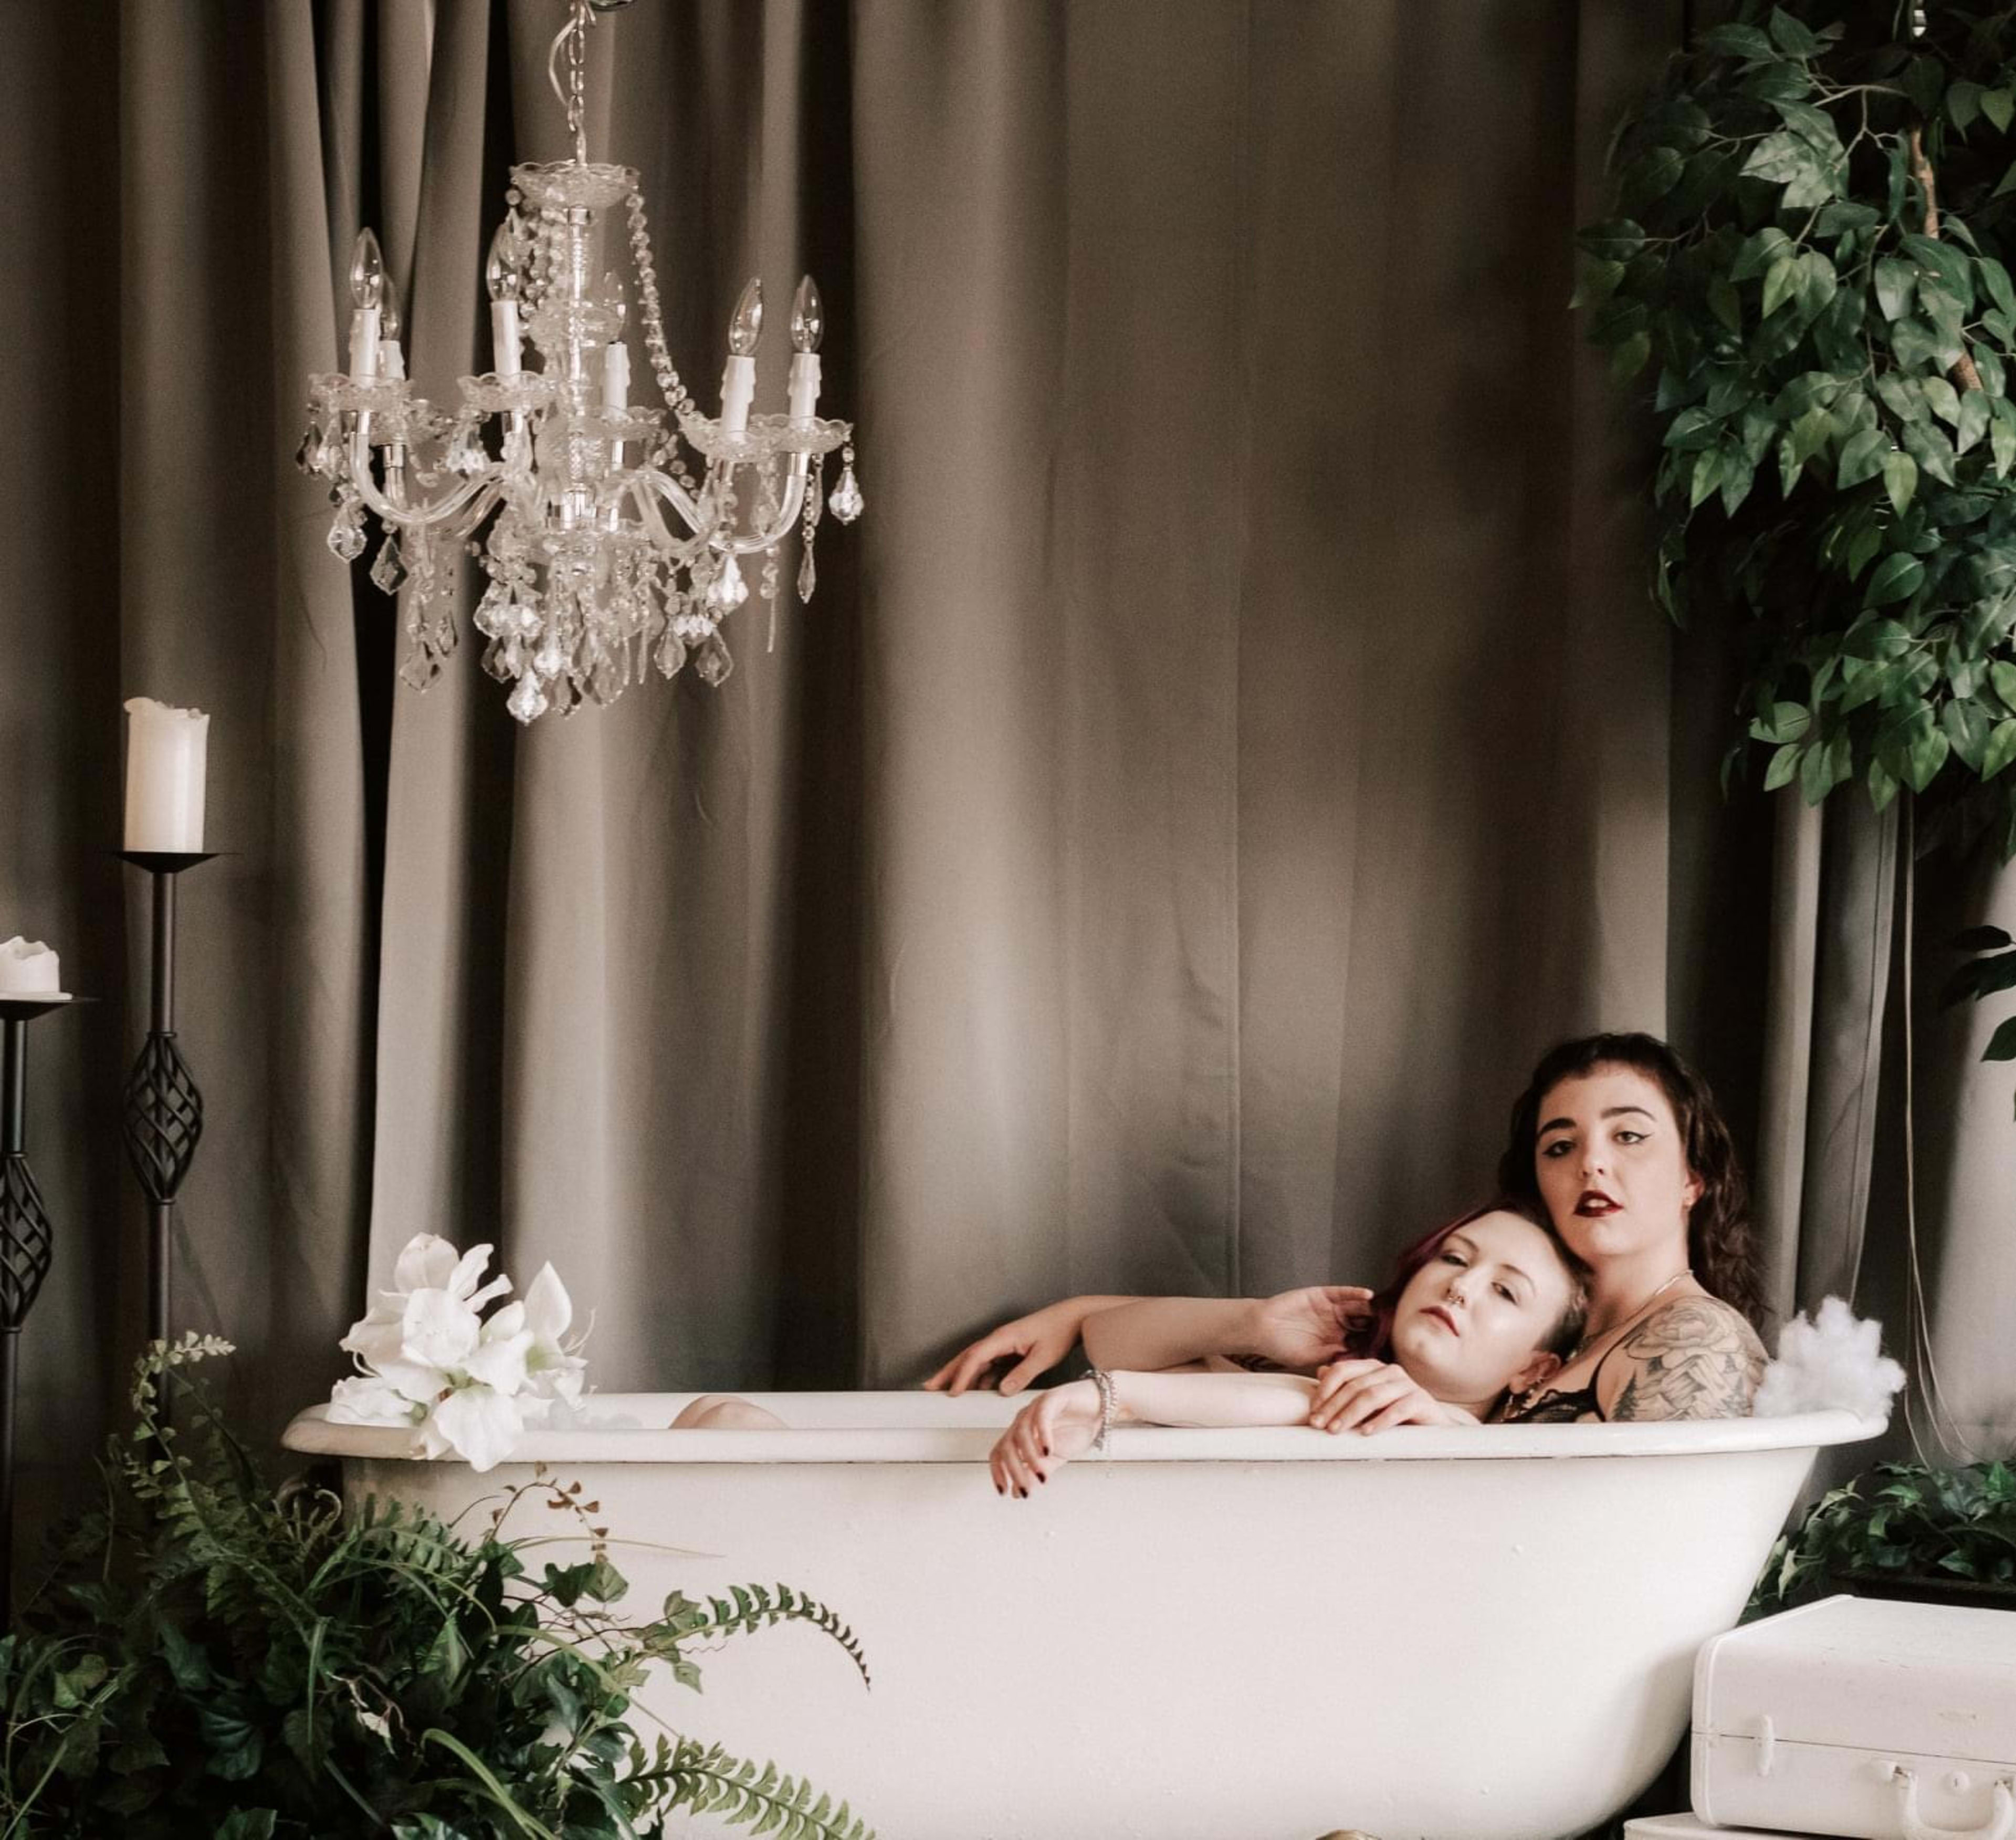 Two women in lingerie pose for a photoshoot in a bathtub surrounded by plants and a chandelier.